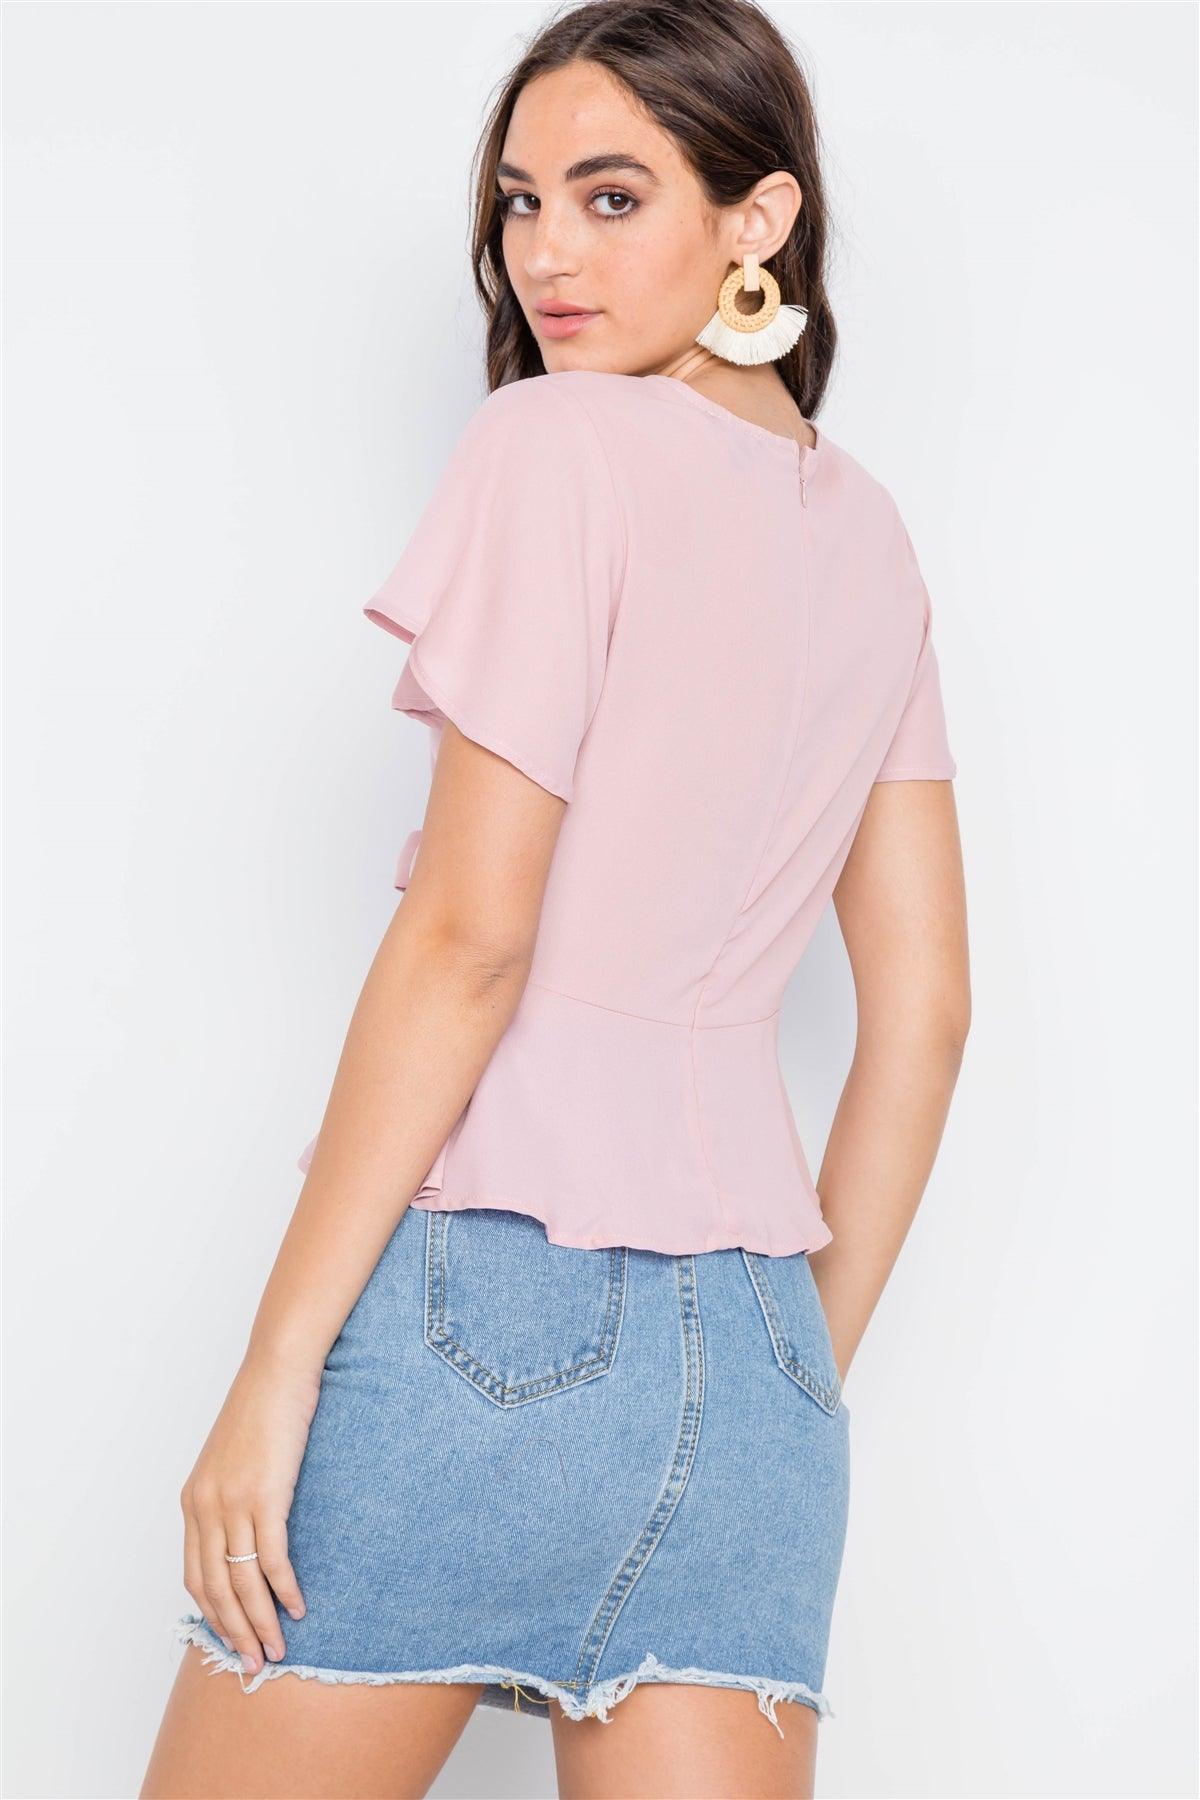 Blush Tie-Front Butterfly Sleeve Chiffon Blouse